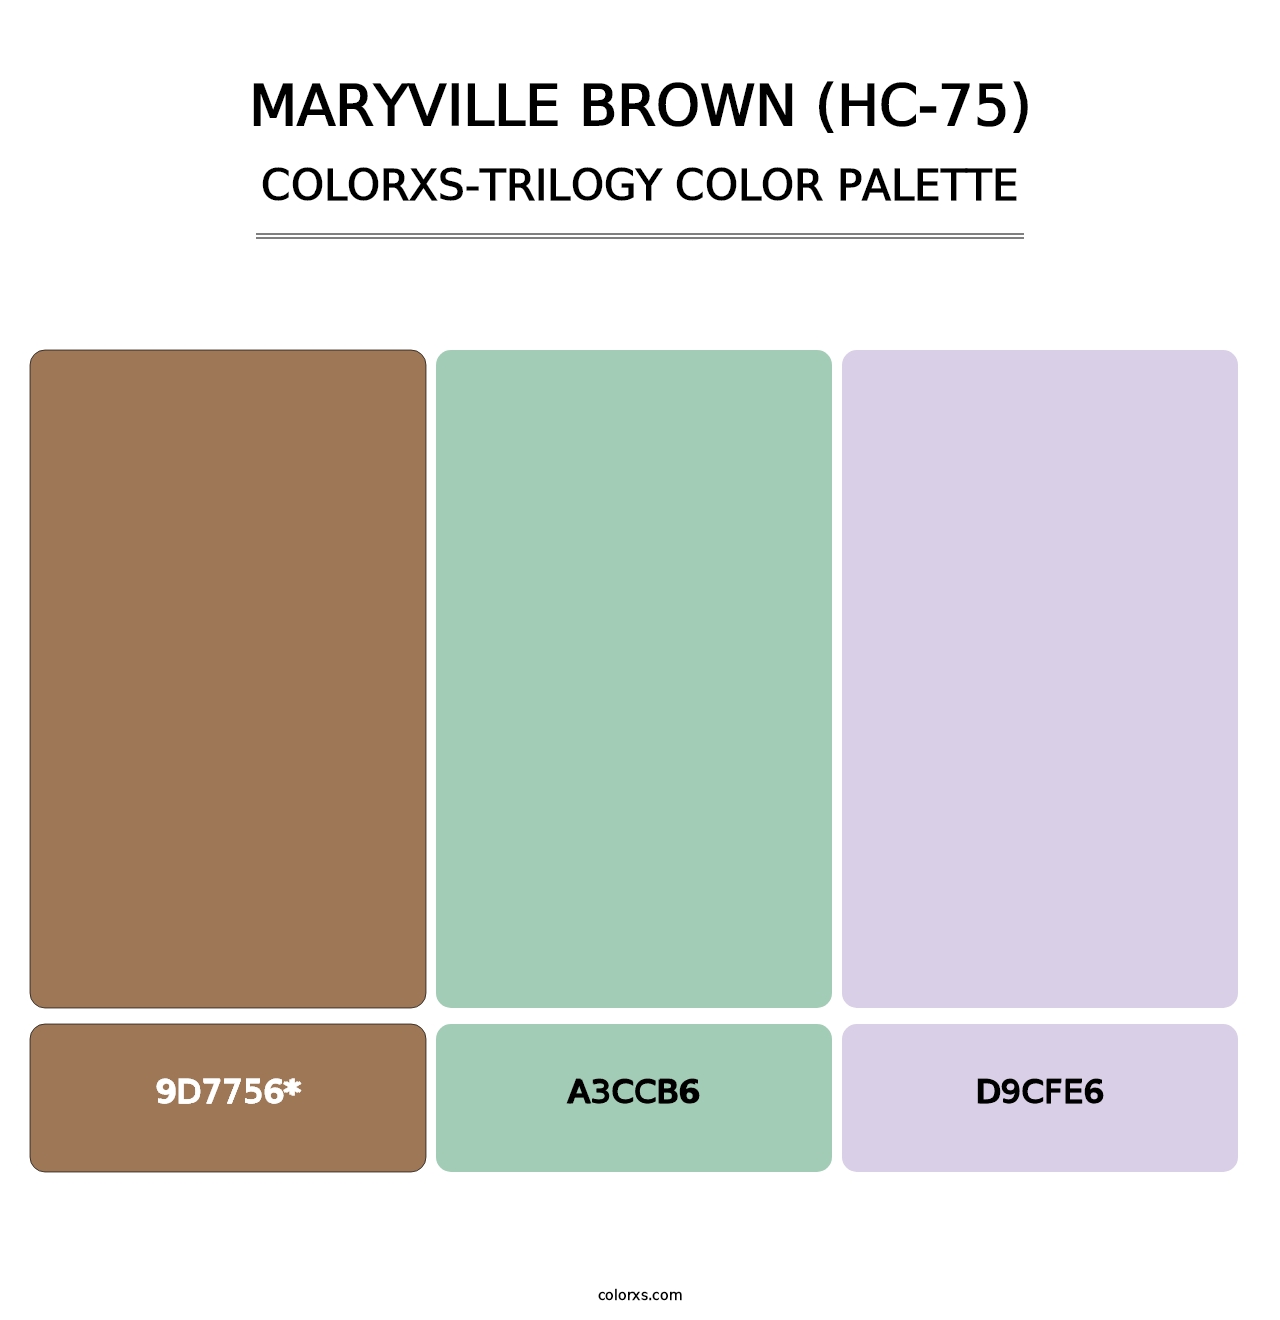 Maryville Brown (HC-75) - Colorxs Trilogy Palette